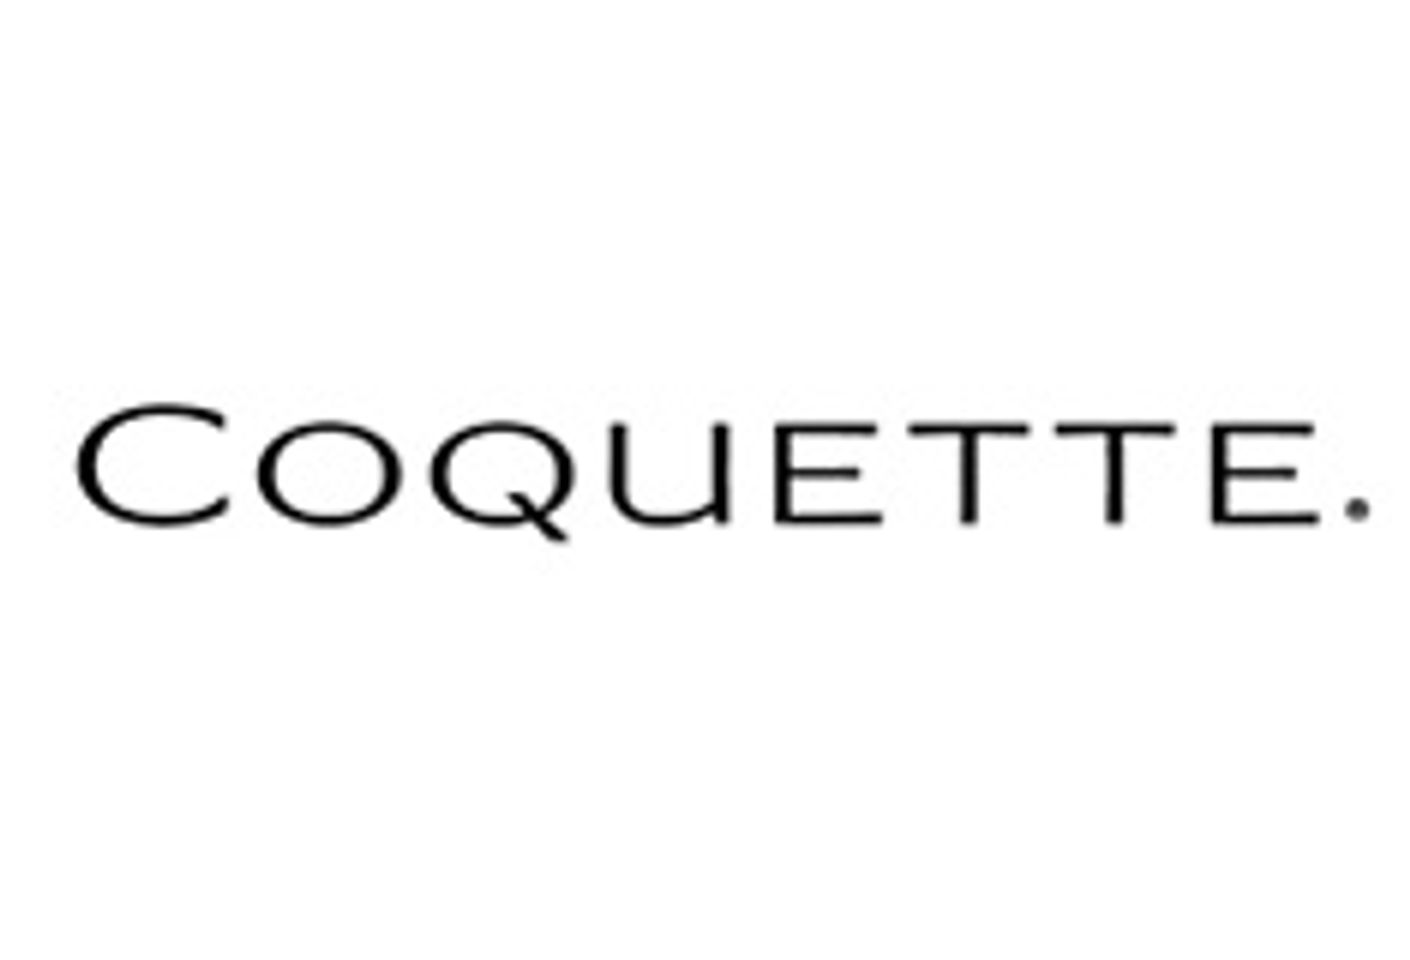 Coquette Celebrates 30 Years with ILS Party, Vacation Giveaway